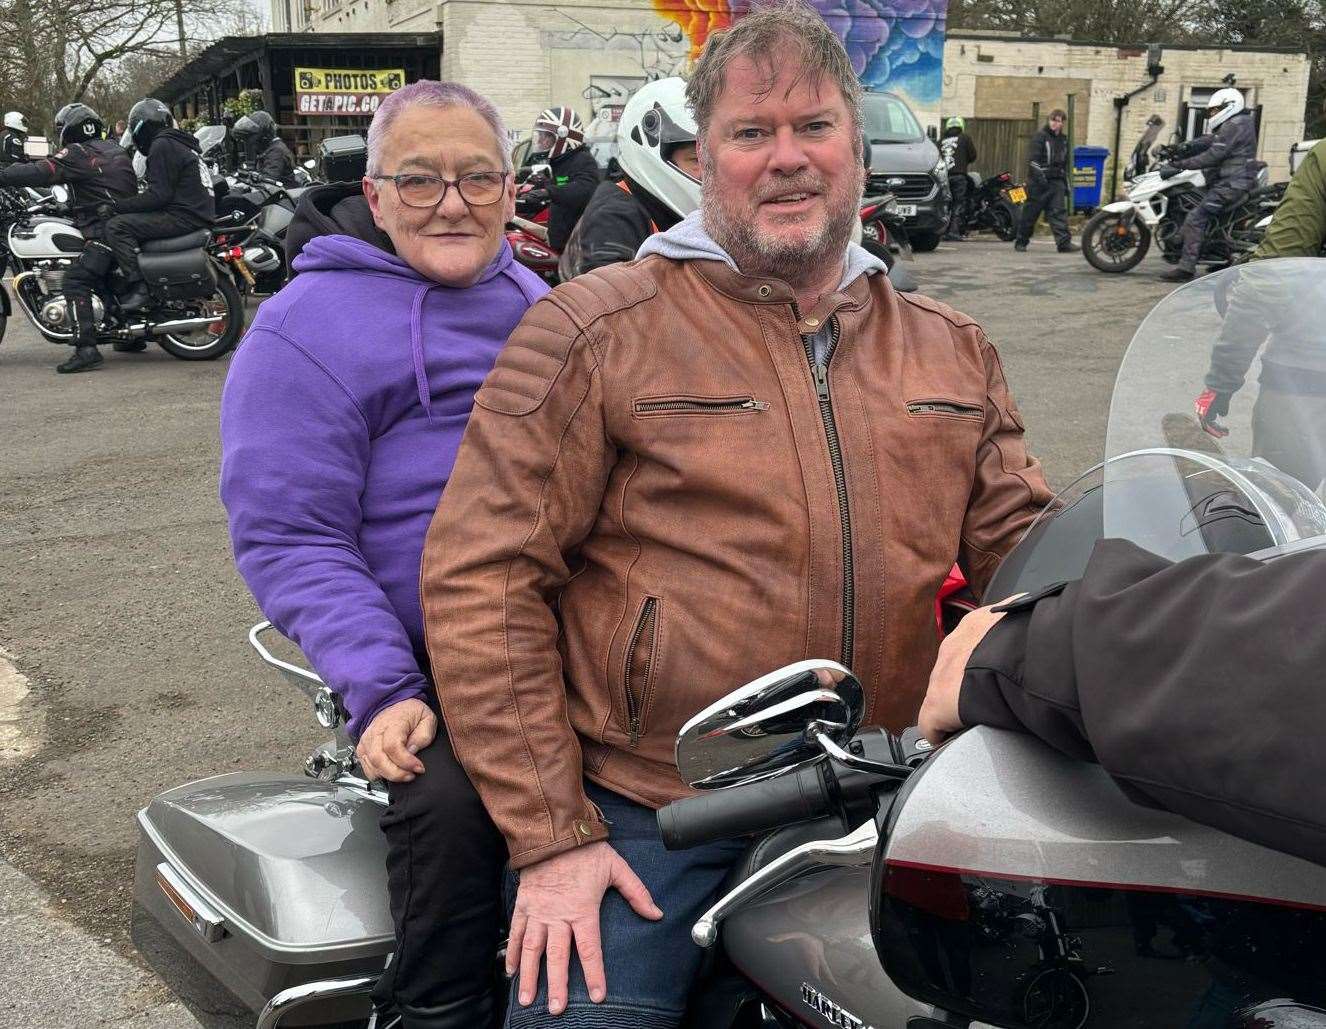 Ellie Lawton was given her dying wish to ride on the back of a Harley-Davidson